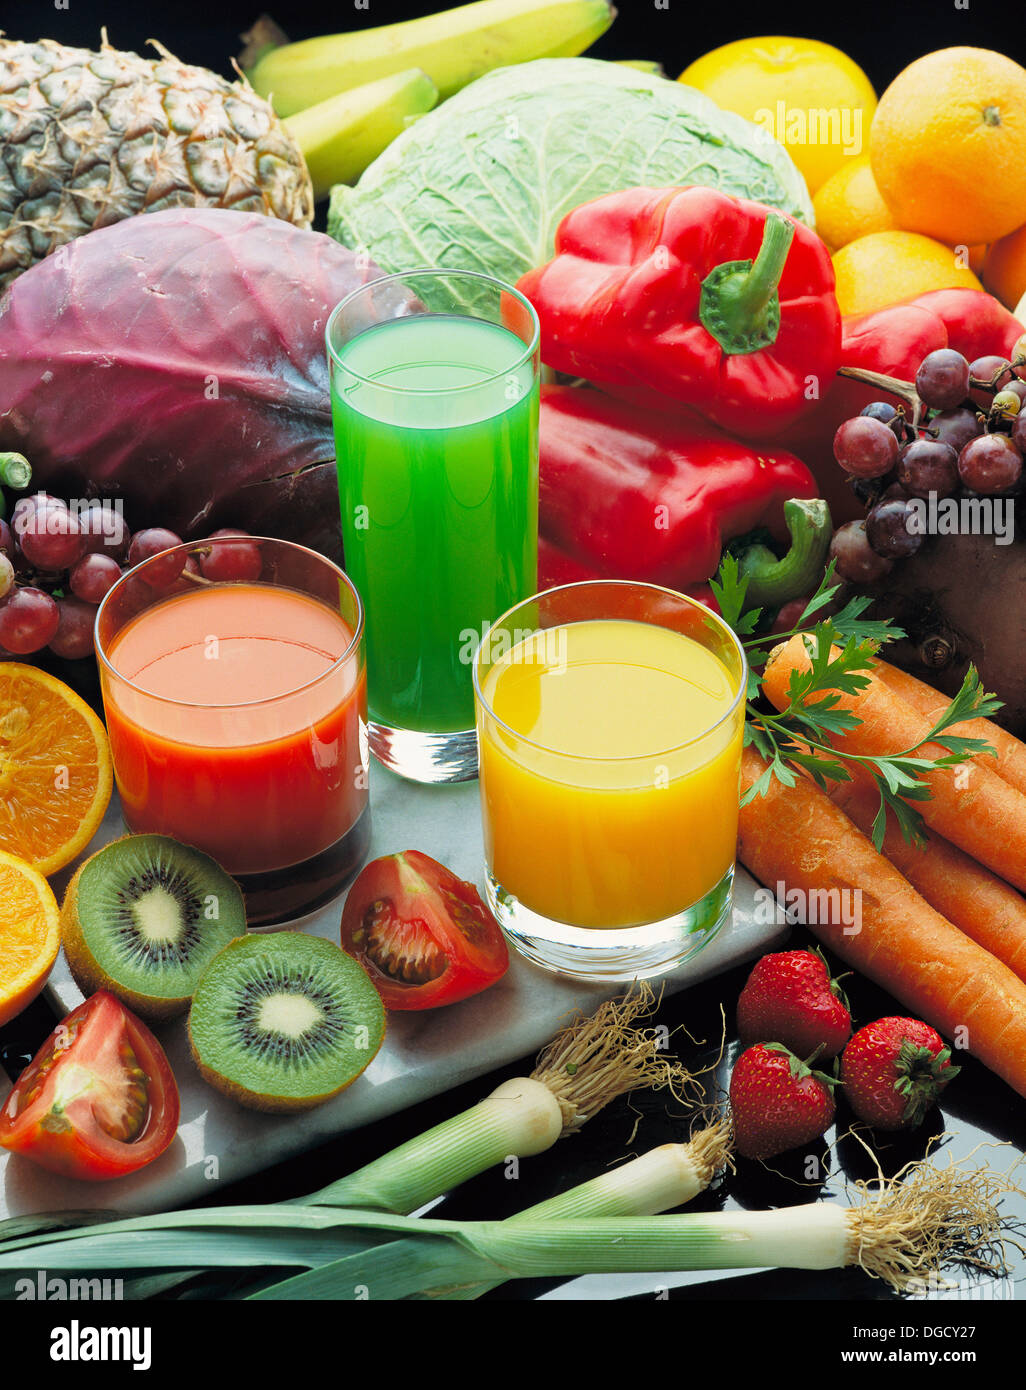 Fruit and vegetable juices Stock Photo